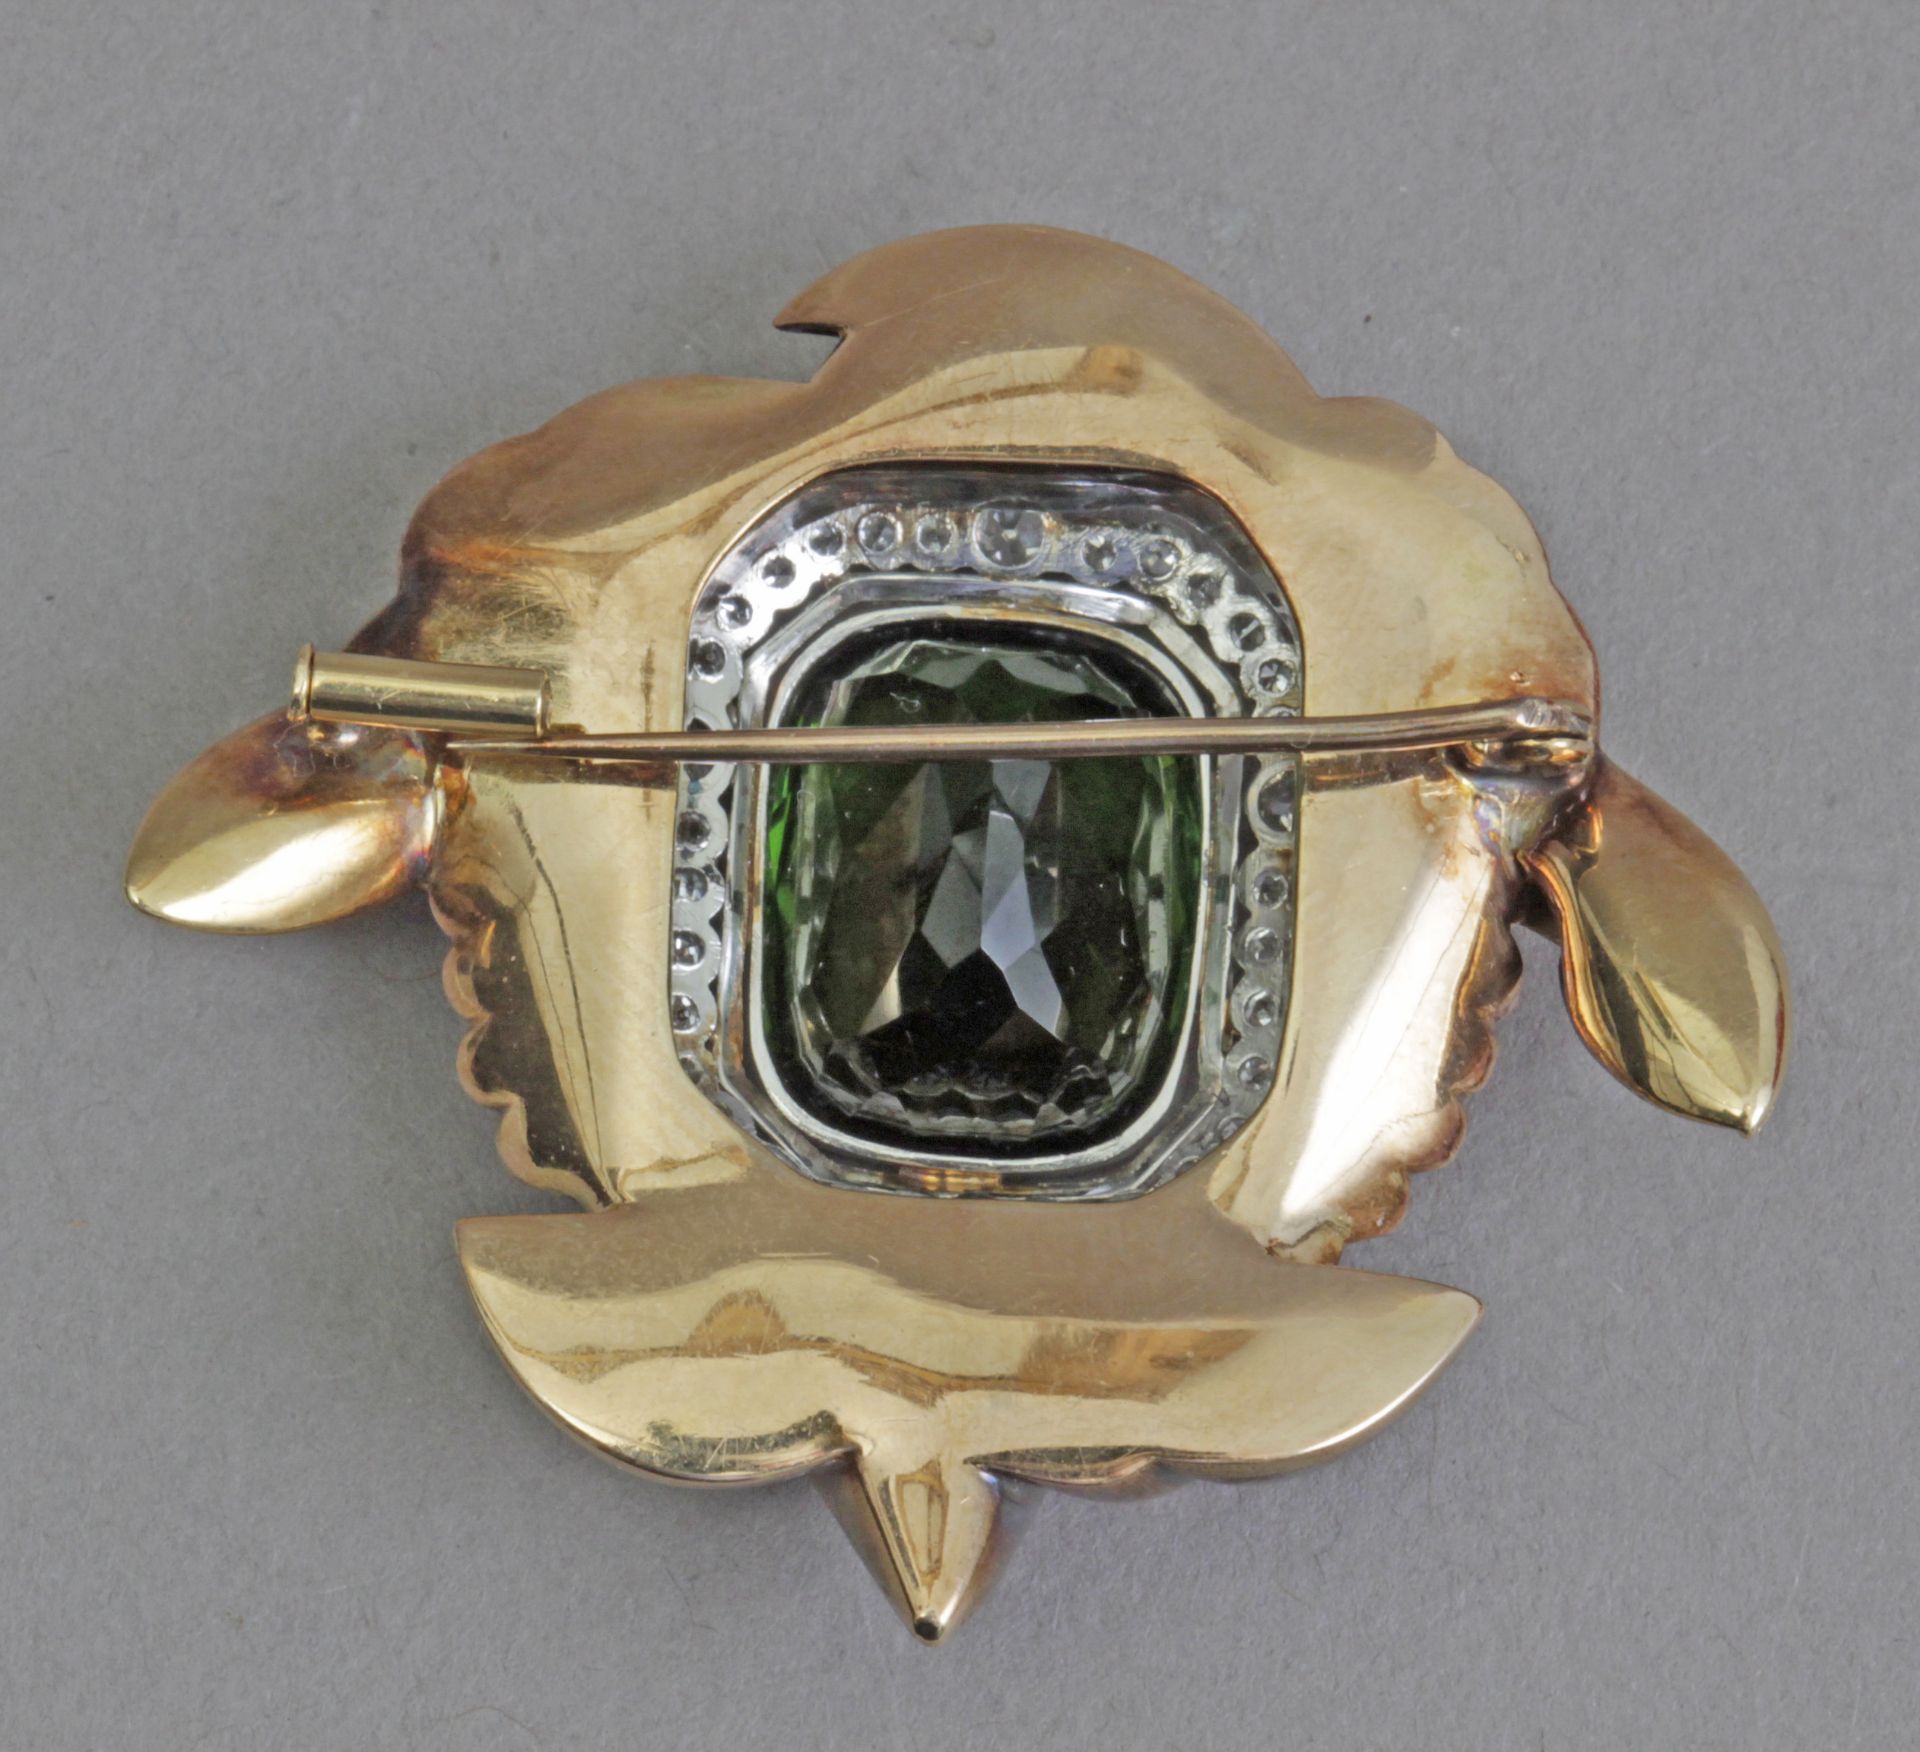 A first half of 20th century tourmaline and diamond brooch - Image 3 of 4